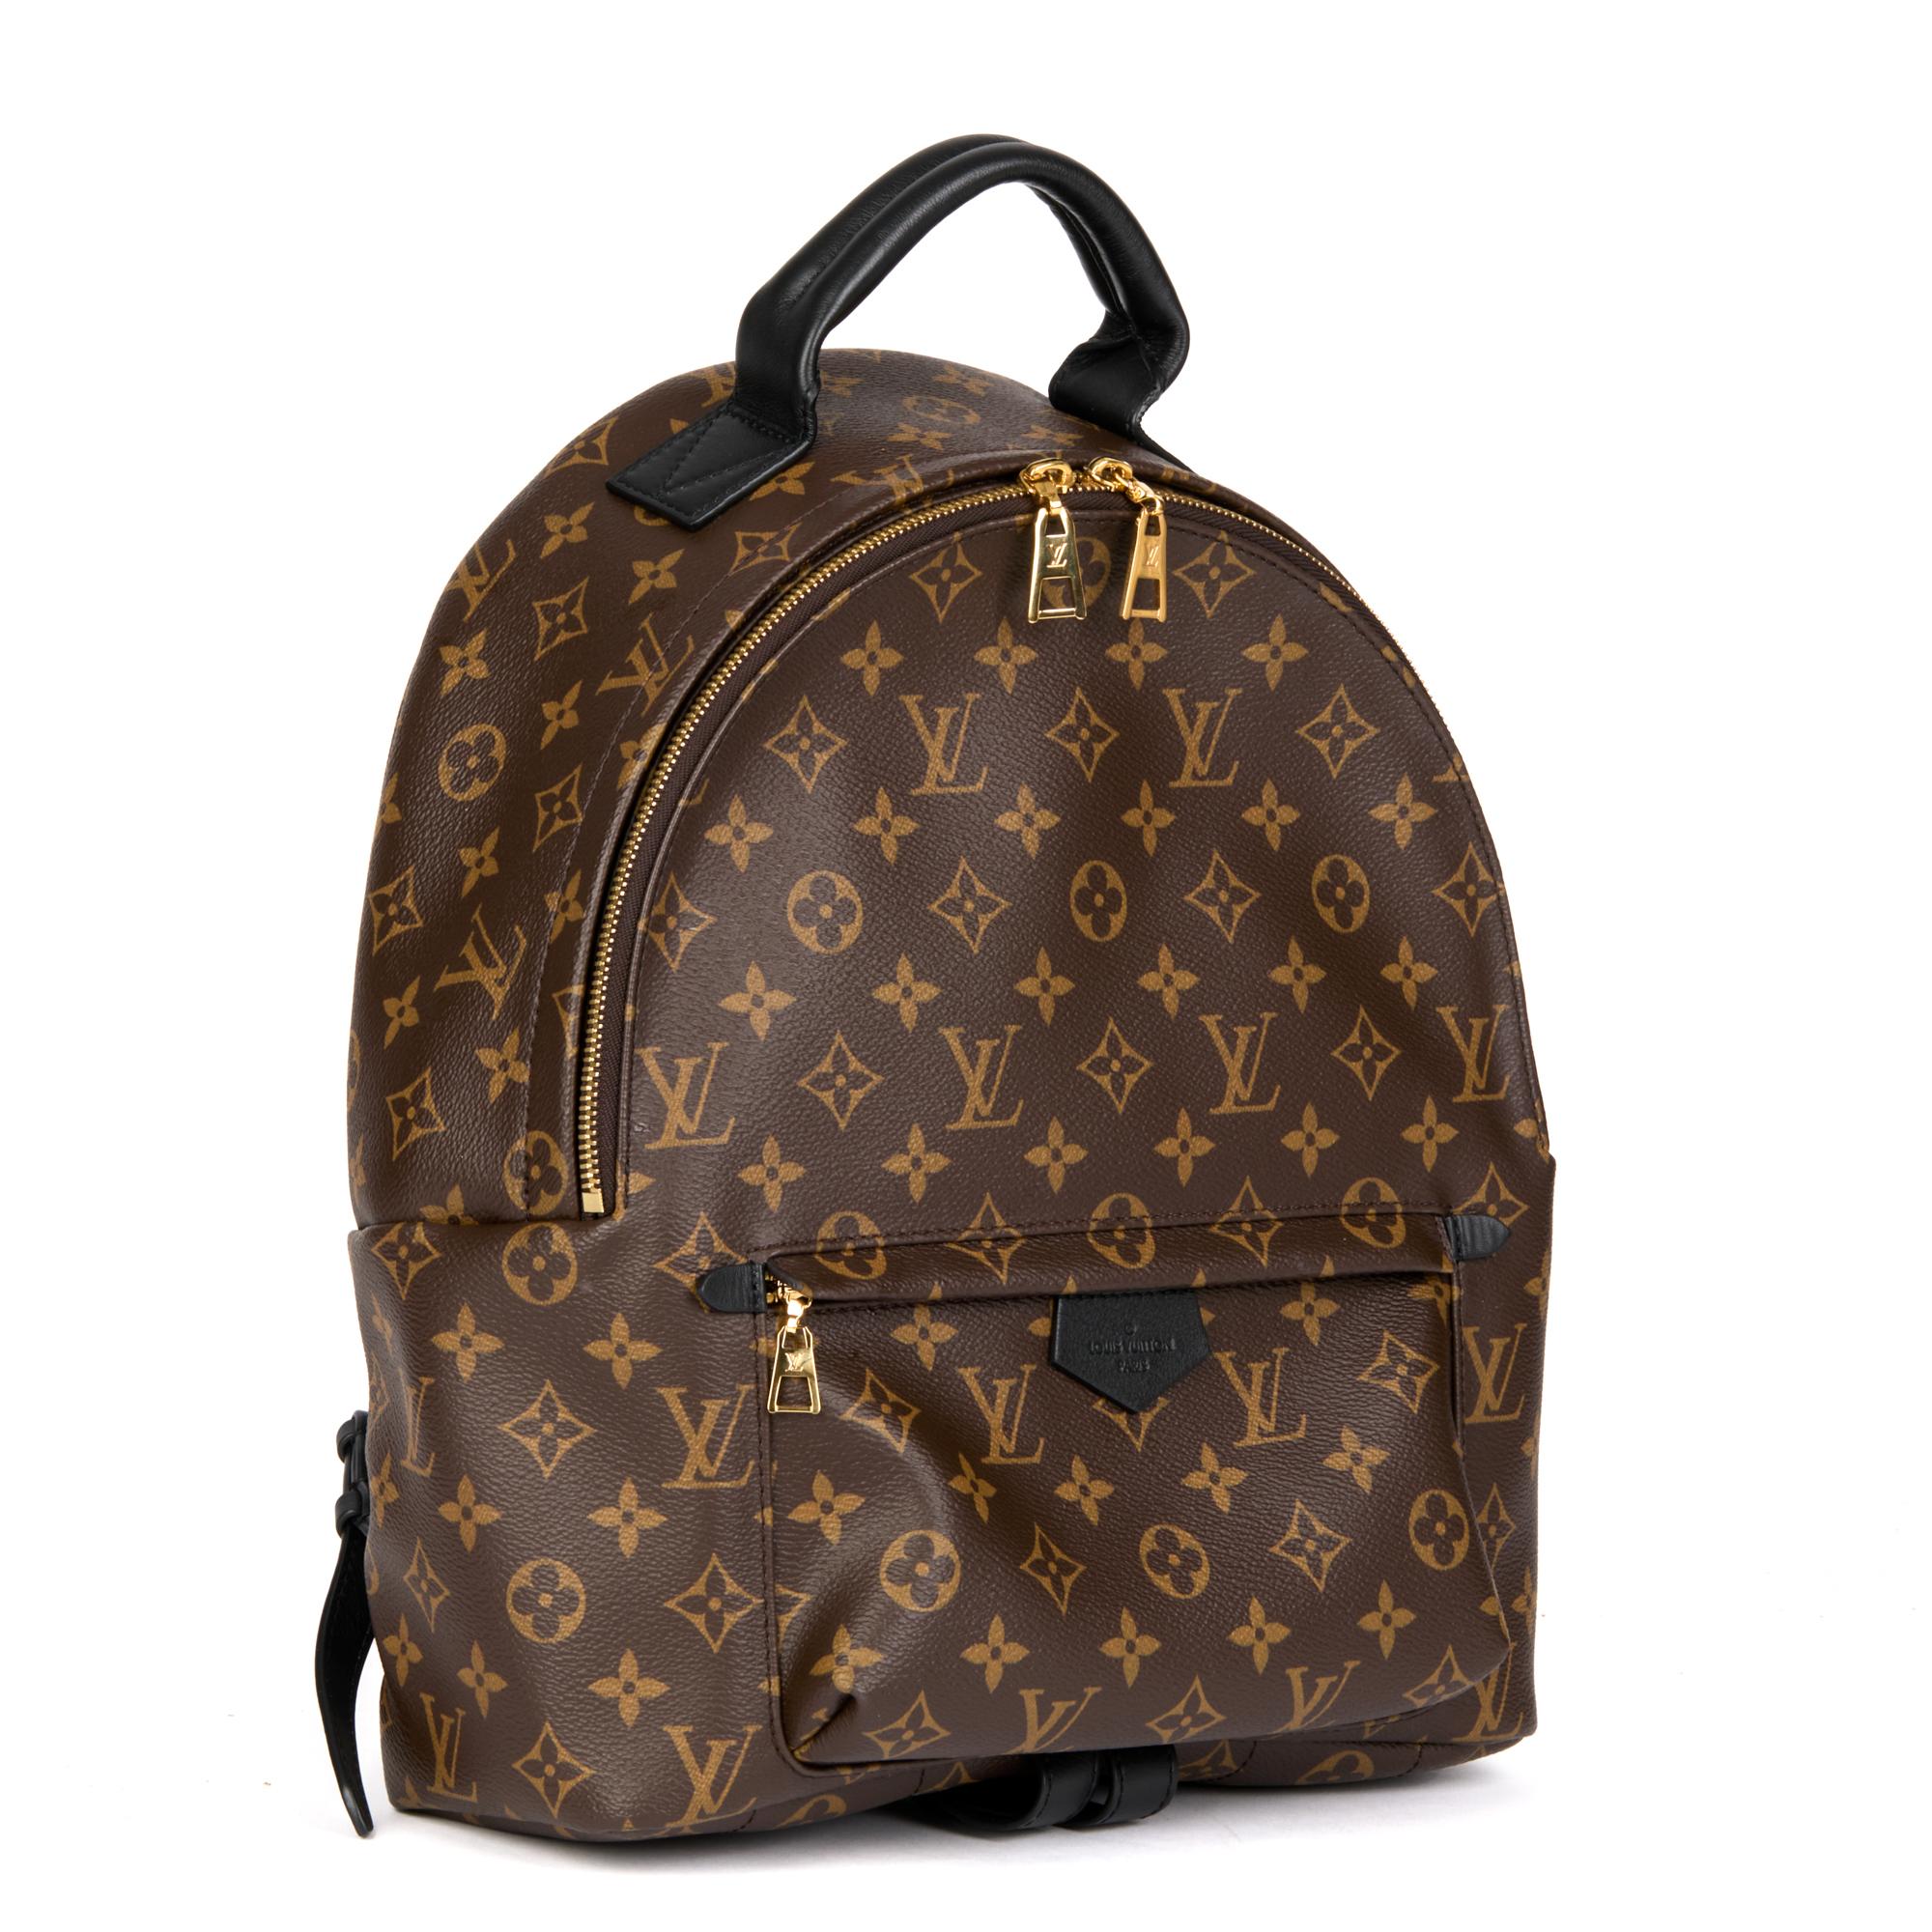 LOUIS VUITTON
Brown Monogram Coated Canvas & Black Calfskin Leather Palm Springs Backpack MM

Xupes Reference: HB4456
Serial Number: PL4149
Age (Circa): 2019
Authenticity Details: Date Stamp (Made in Italy)
Gender: Ladies
Type: Backpack

Colour: